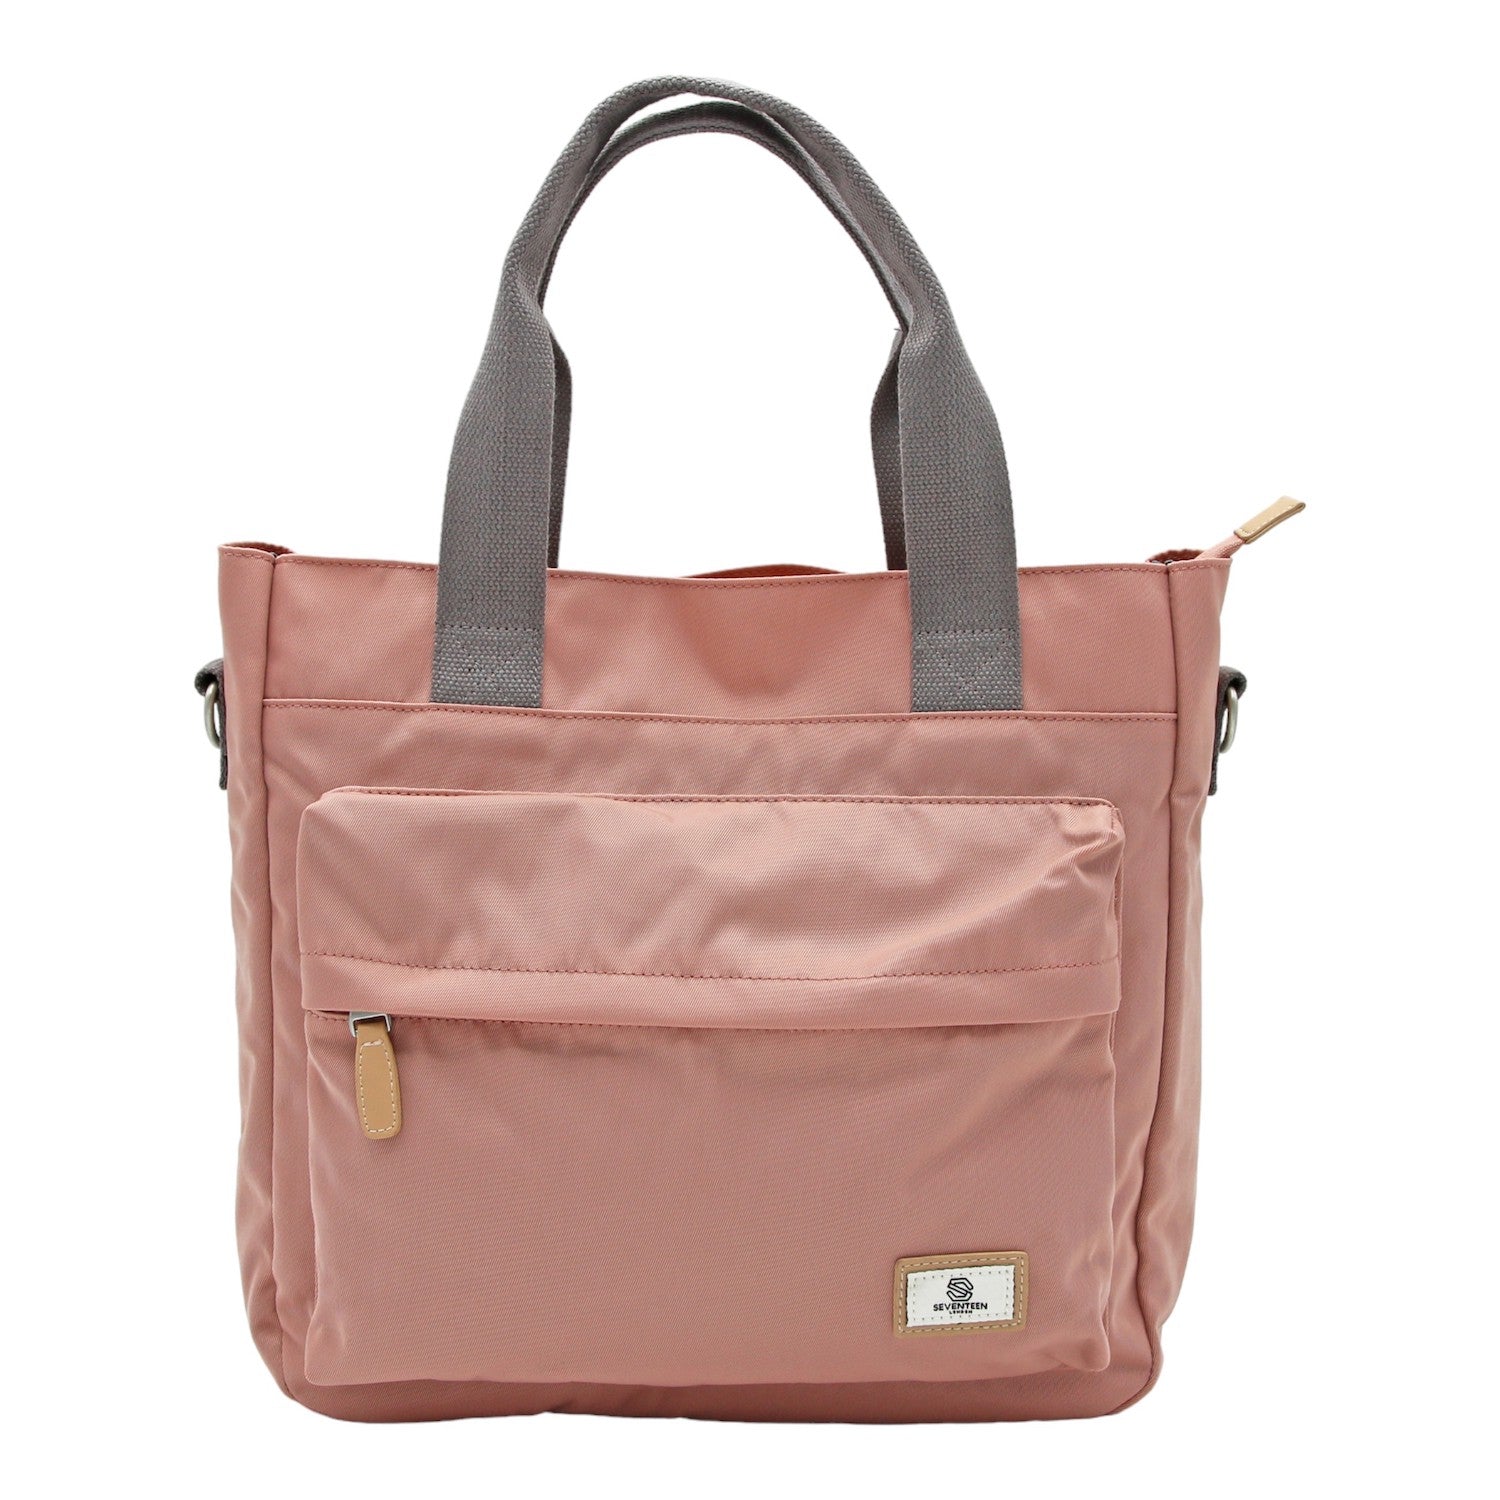 Covent Garden Tote Bag - Pink